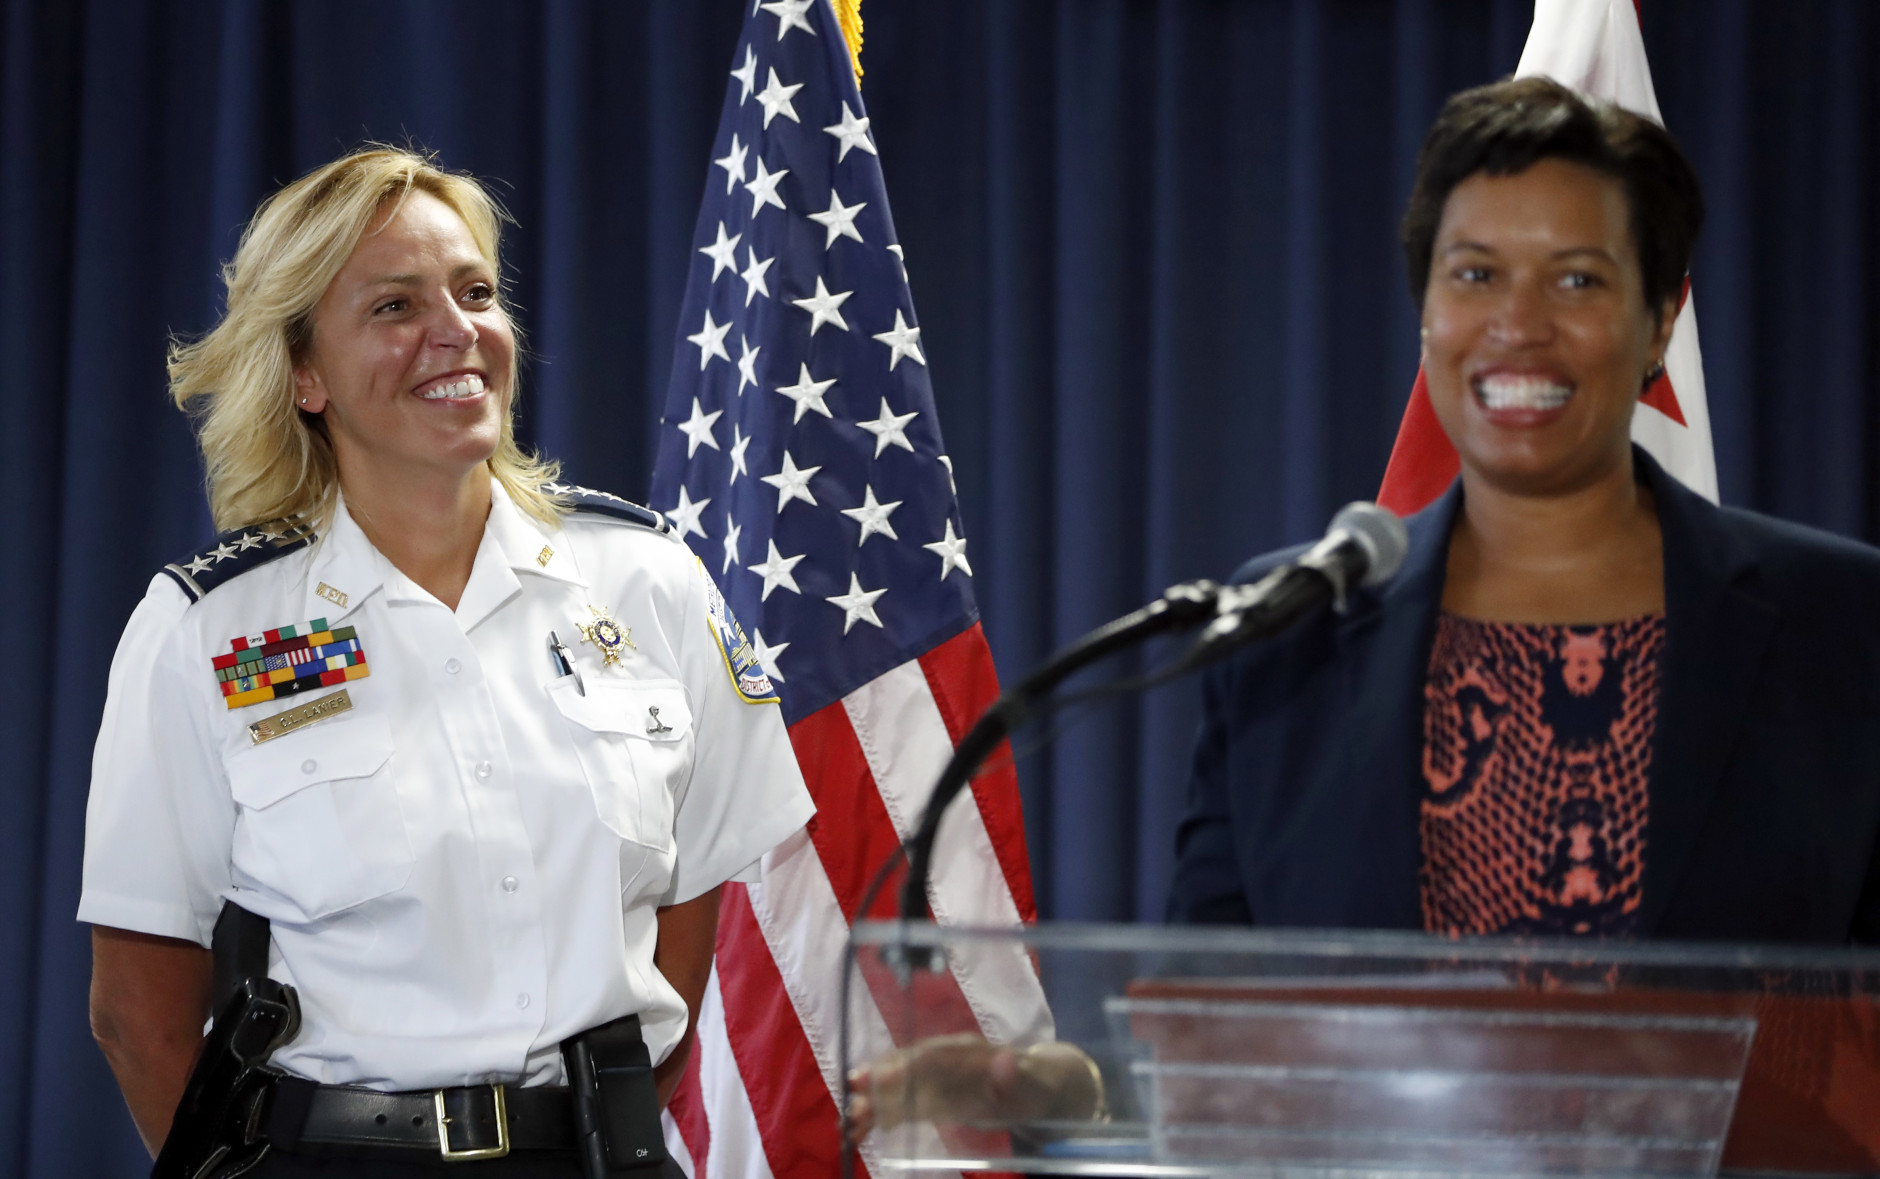 Washington police chief Cathy Lanier smiles at left as Washington Mayor Muriel Bowser speaks during a news conference, Tuesday, Aug. 16, 2016, in Washington. Lanier is stepping down to become head of security for the National Football League. (AP Photo/Alex Brandon)